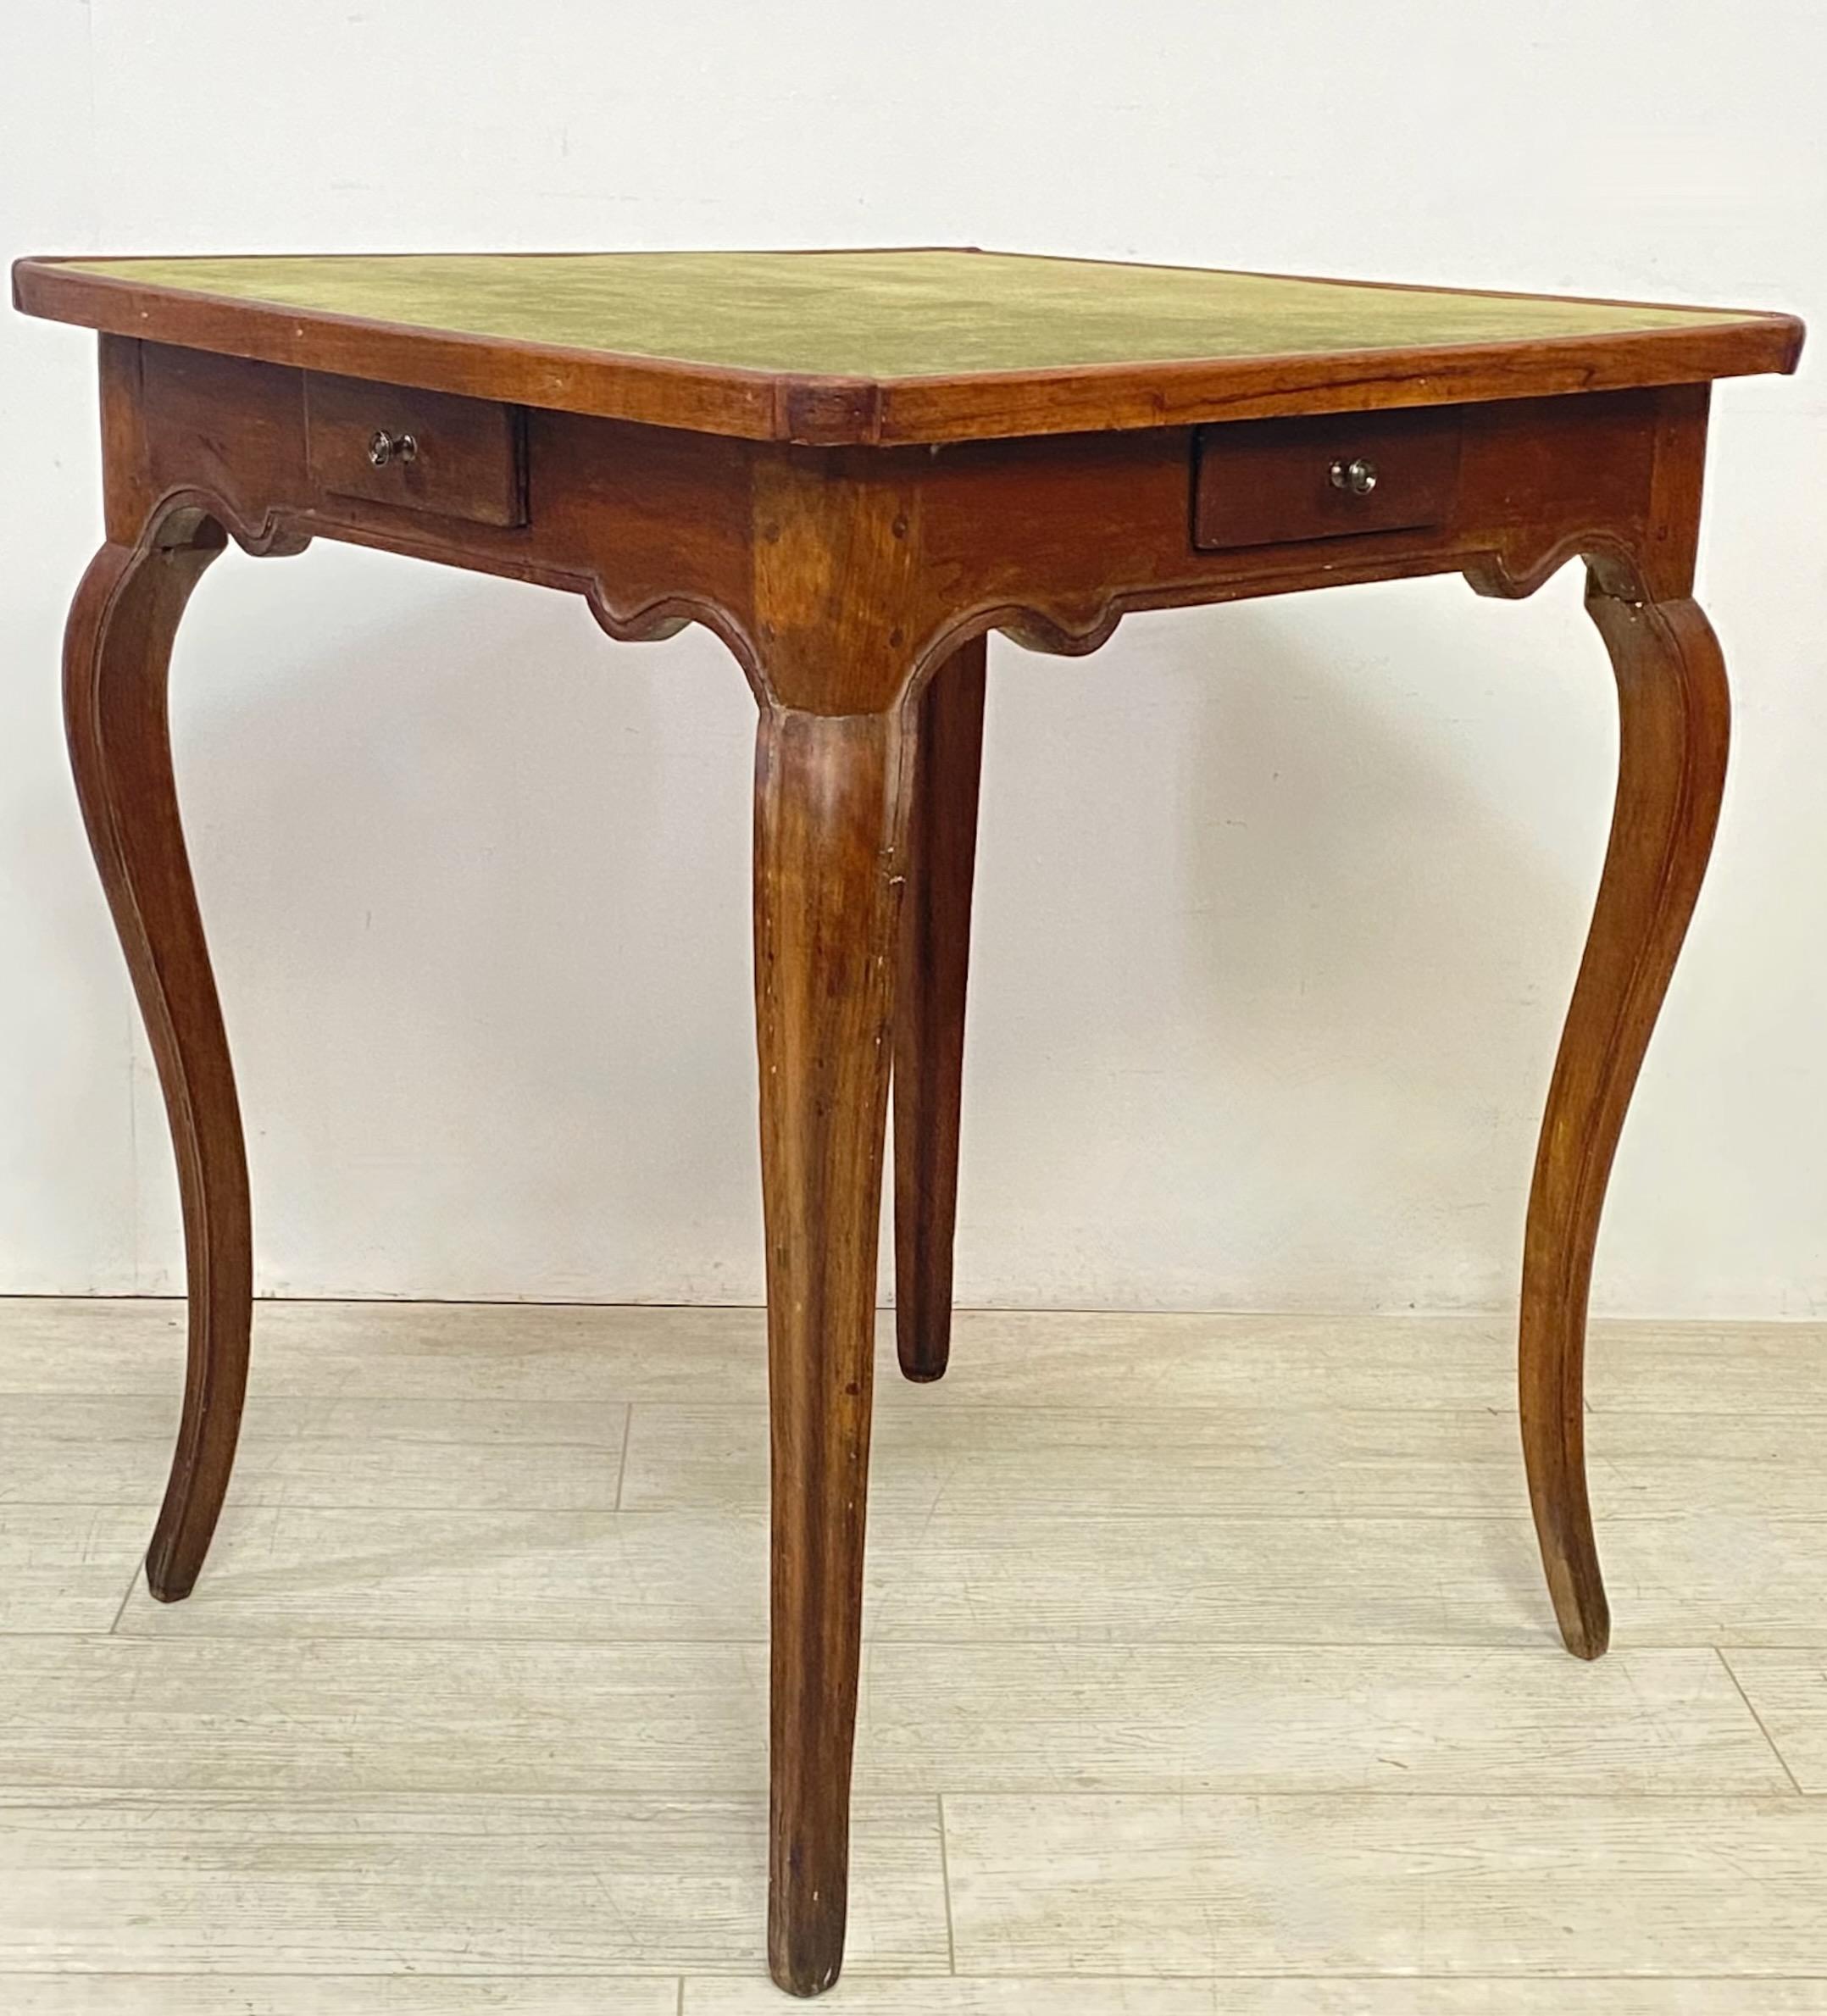 A completely hand crafted walnut game table in the 18th century form but likely made in the early to mid 19th century. Having a recently replaced suede leather table top surface. 
Beautiful simple elegant design. Sturdy and sound.
In excellent